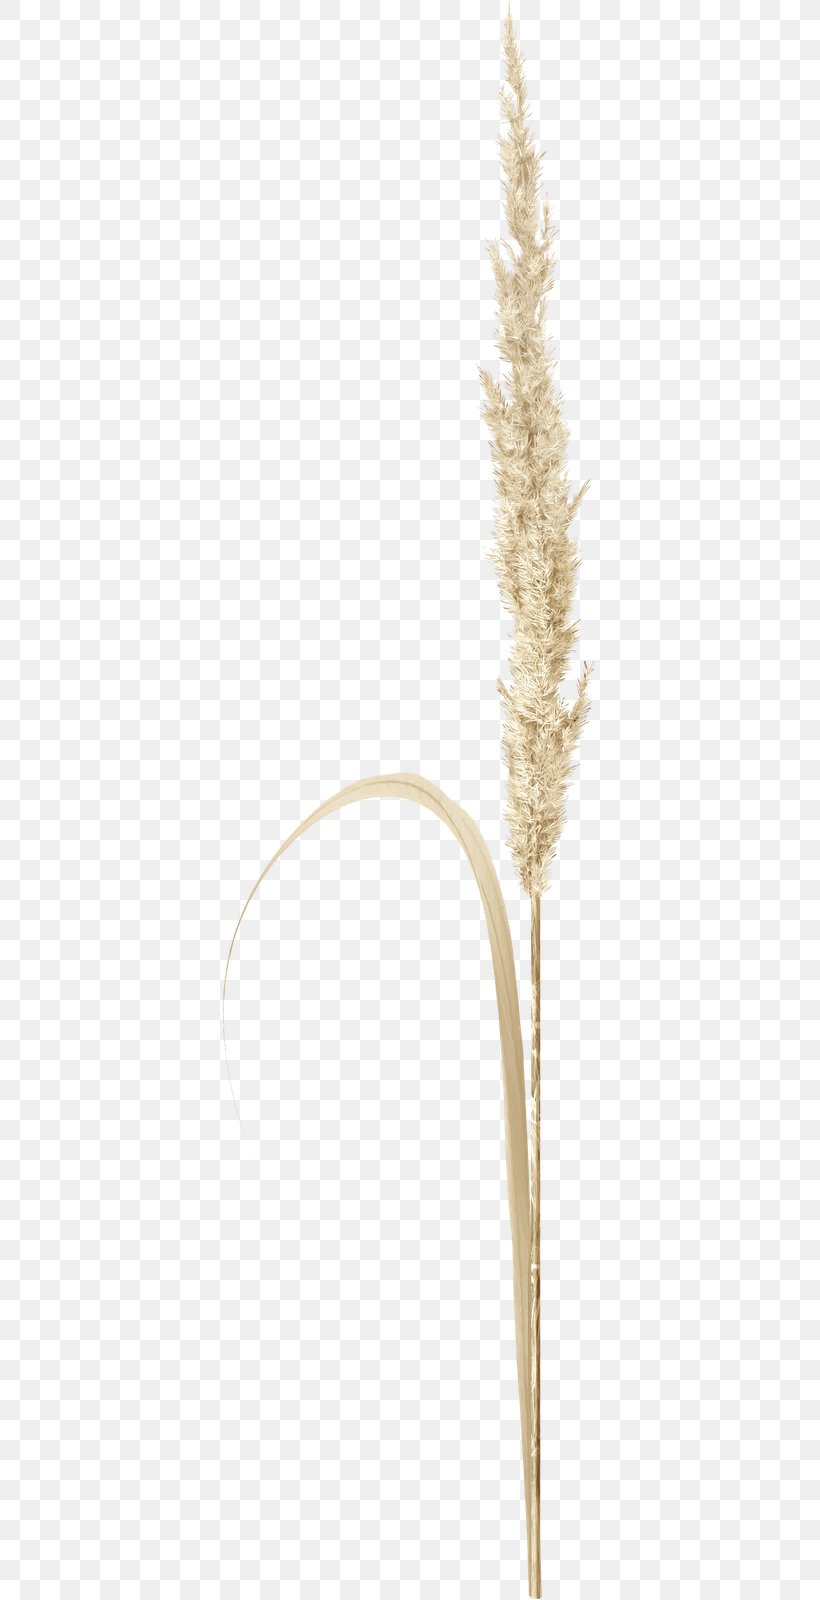 Grasses Cereal Grain Food Family, PNG, 373x1600px, Grasses, Cereal, Commodity, Family, Food Download Free